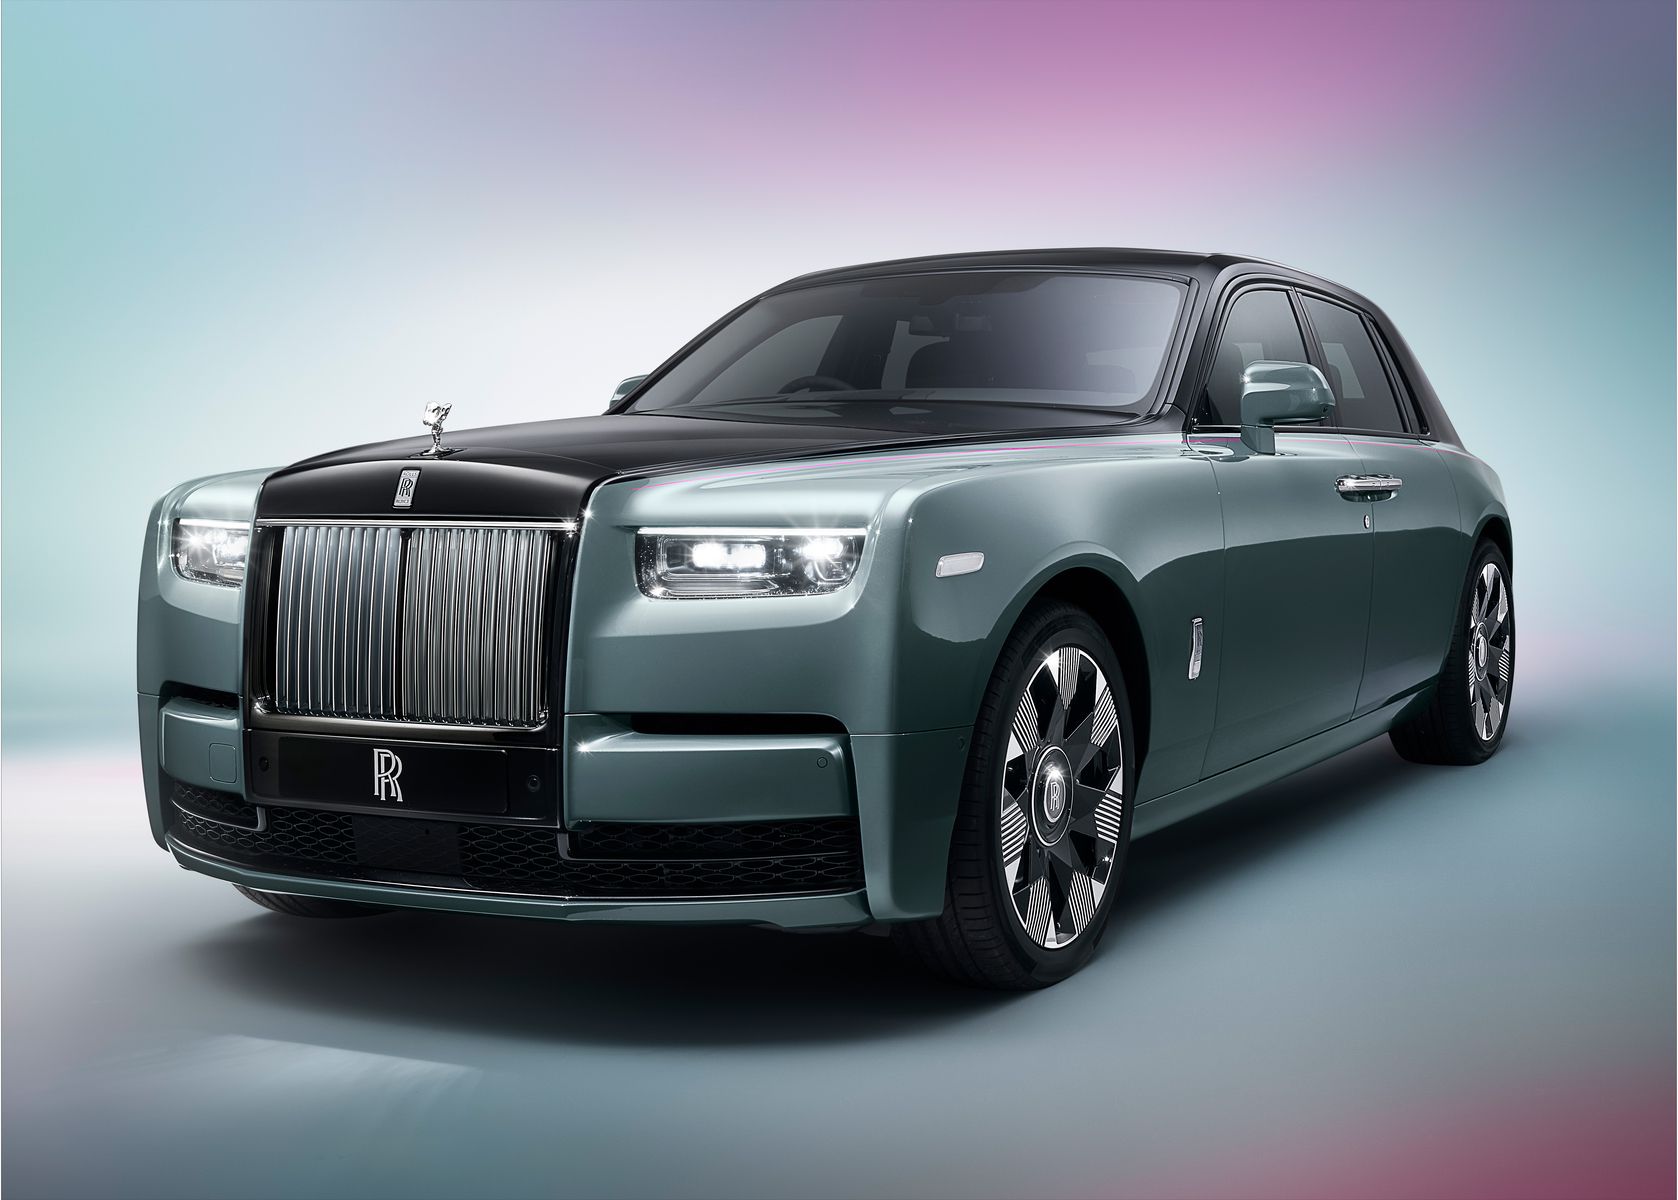 Moment A Tricycle Crashes Into A 350 Million RollsRoyce Cullinan